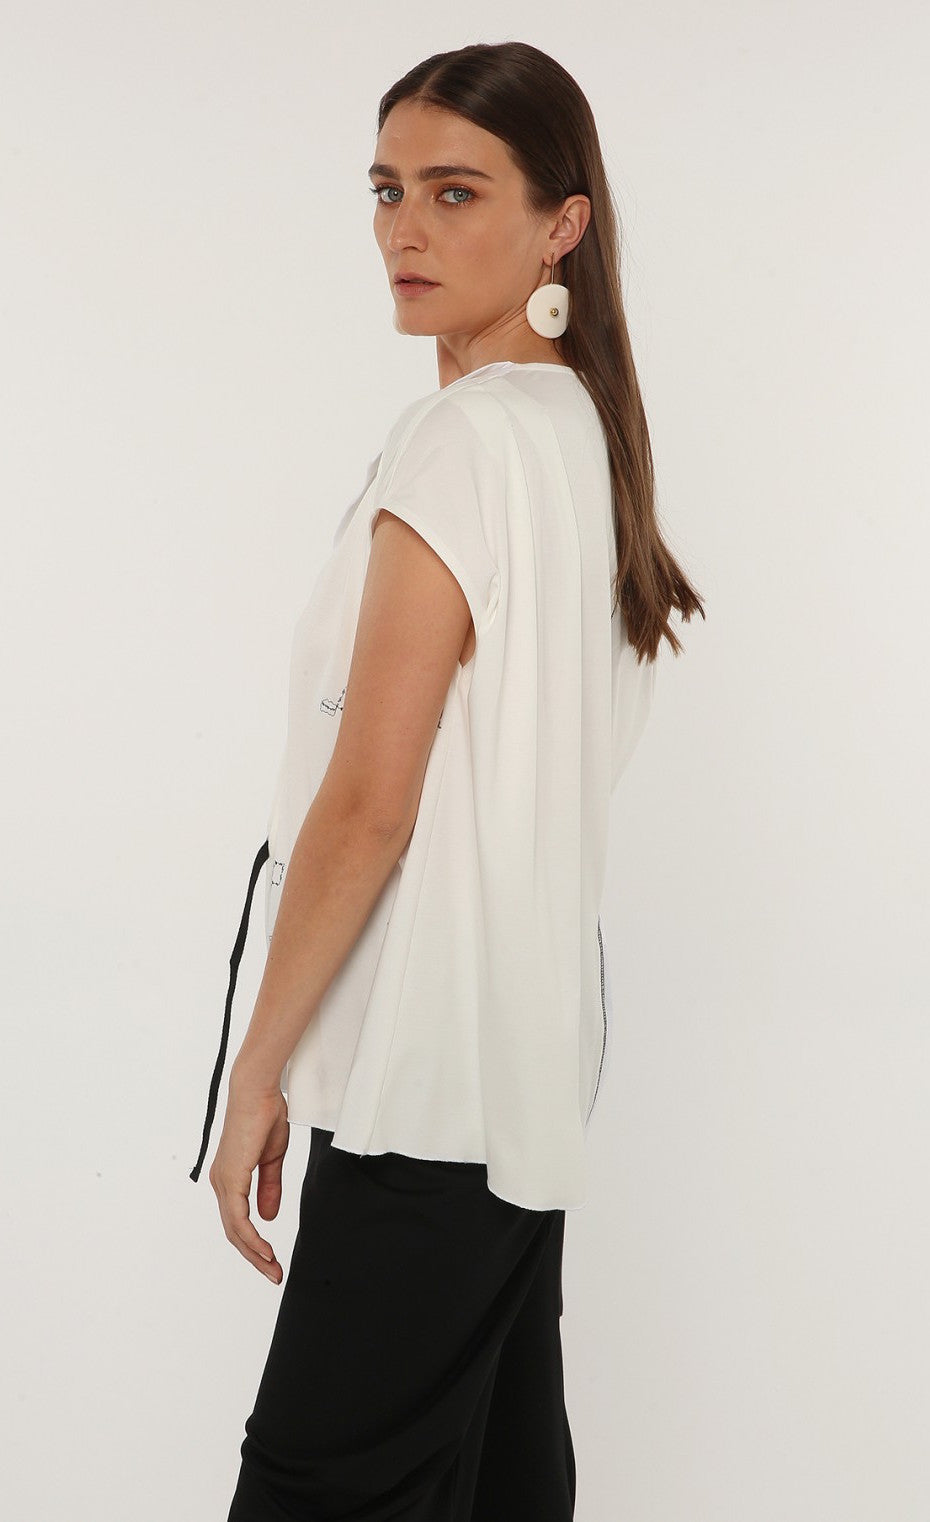 Left sided top half view of a woman wearing the ozai n ku tuberose top. This top is white and off-white. The front has cap sleeves, black little sketched designs, a split v-neck, and a drawstring waist on the right side.